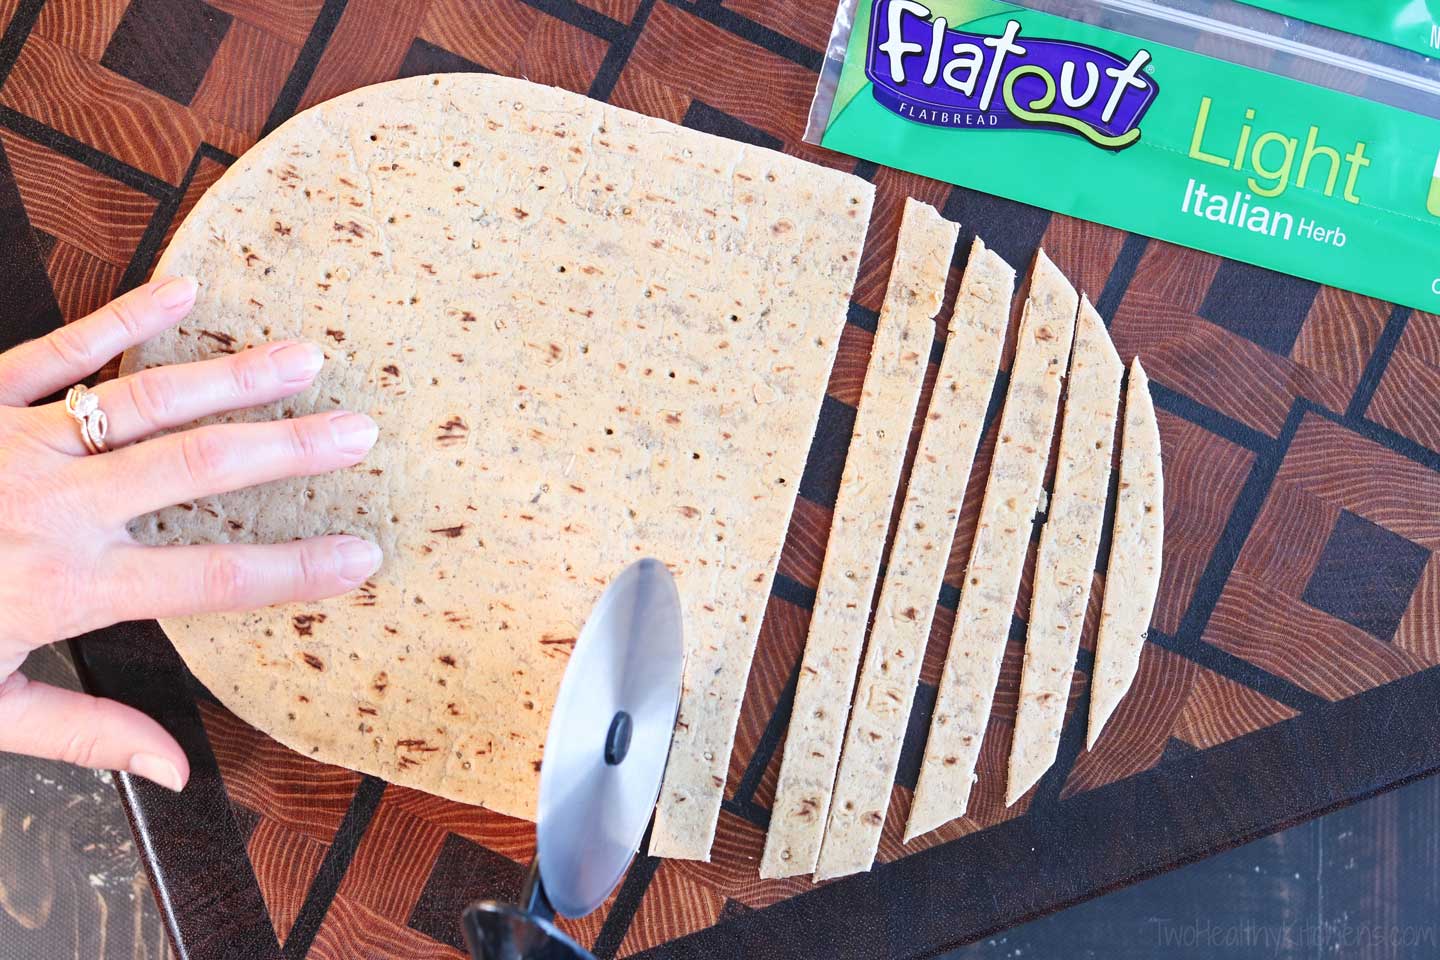 Making the flatbread croutons is easy! Just cut flatbreads into squares before toasting!